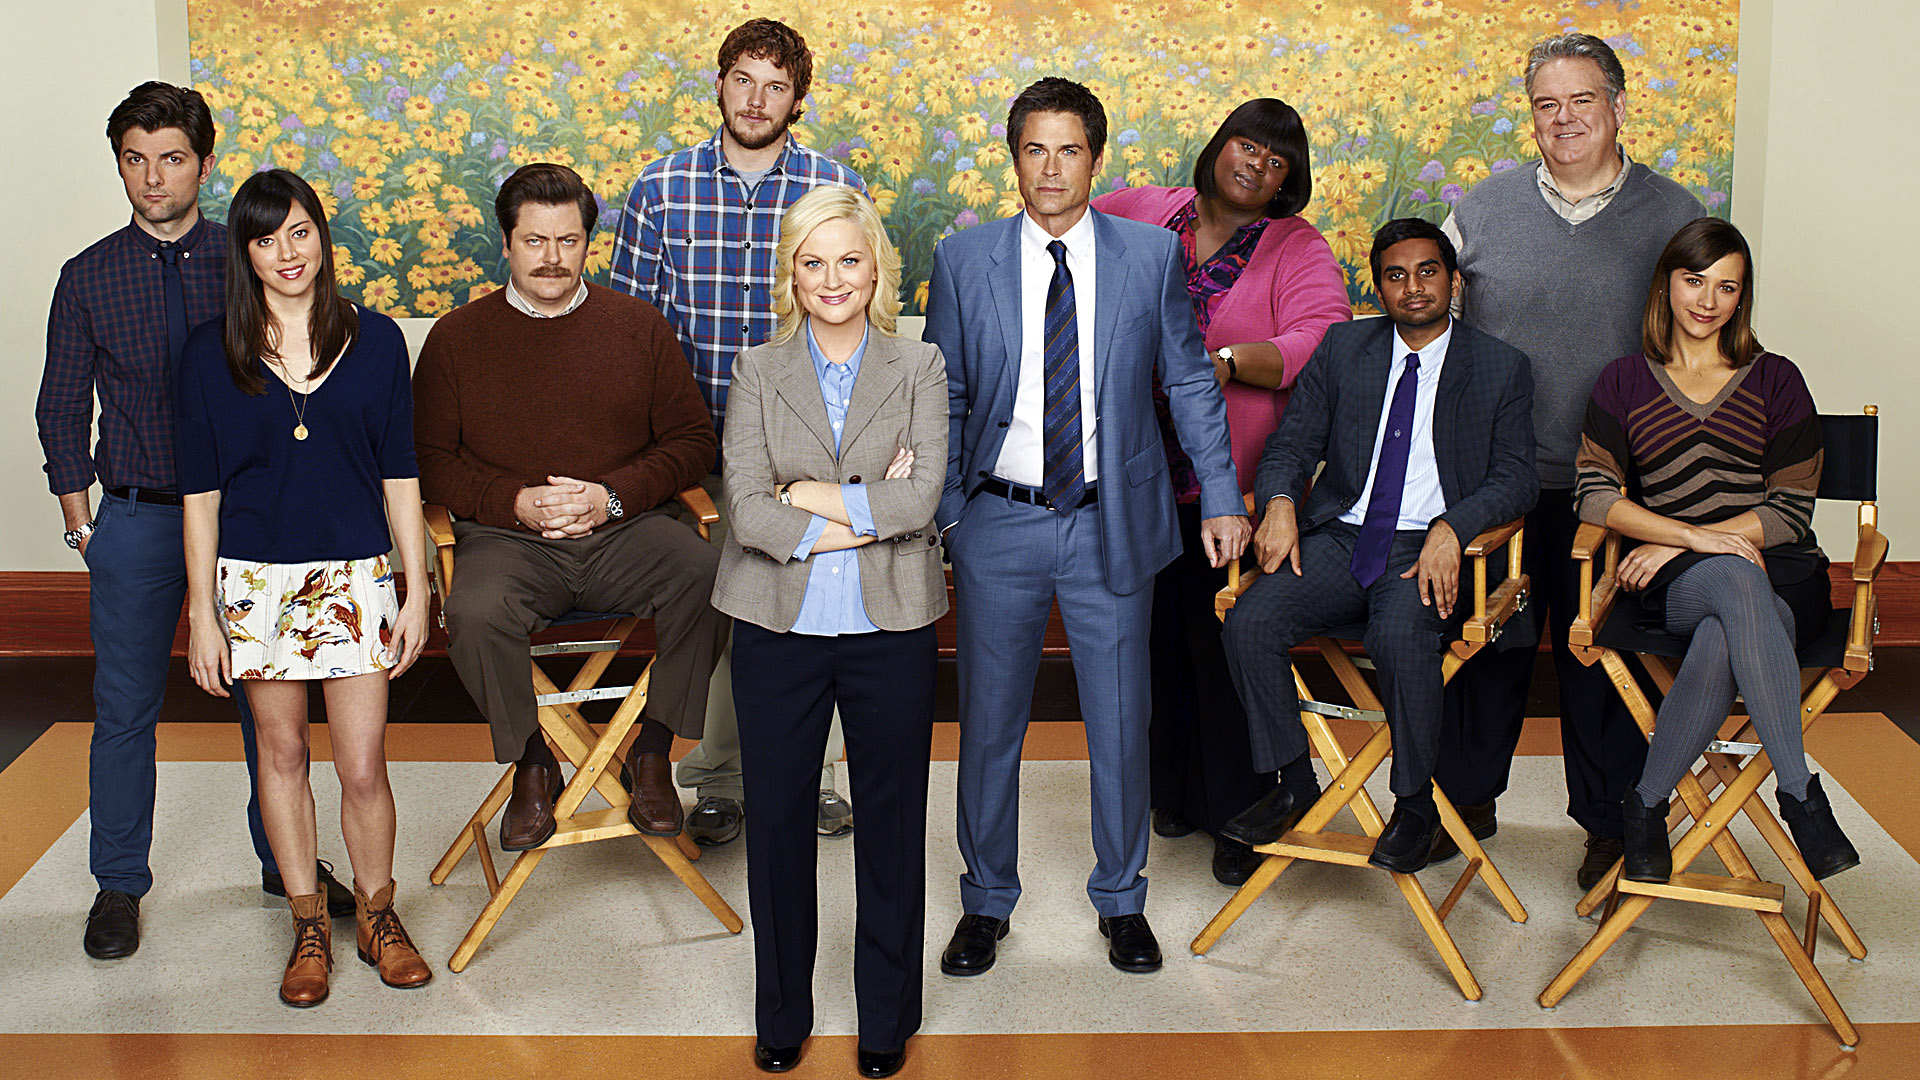 parks and rec wallpaper,social group,people,event,team,community